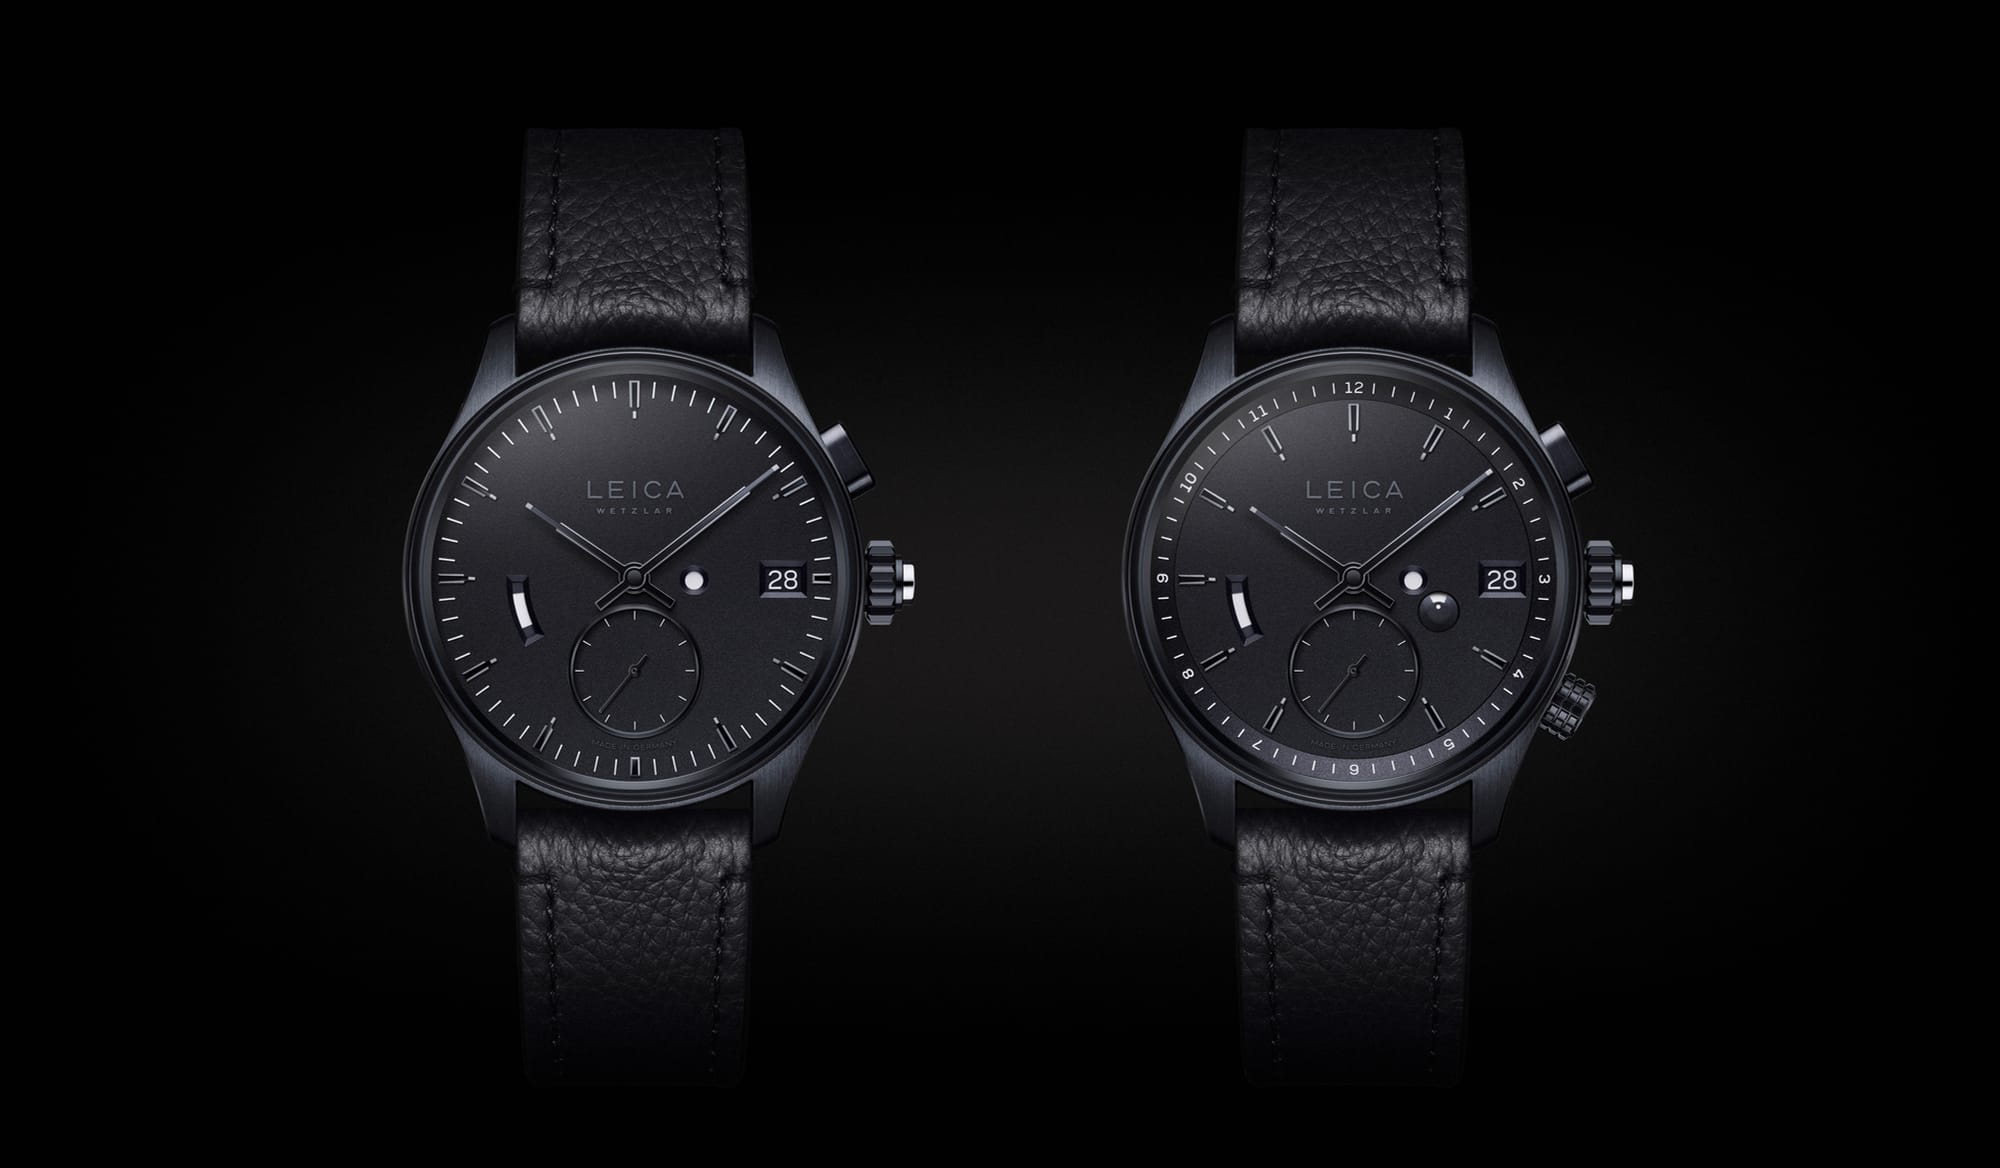 Leica launches new monochrome ZM1 and ZM2 watches